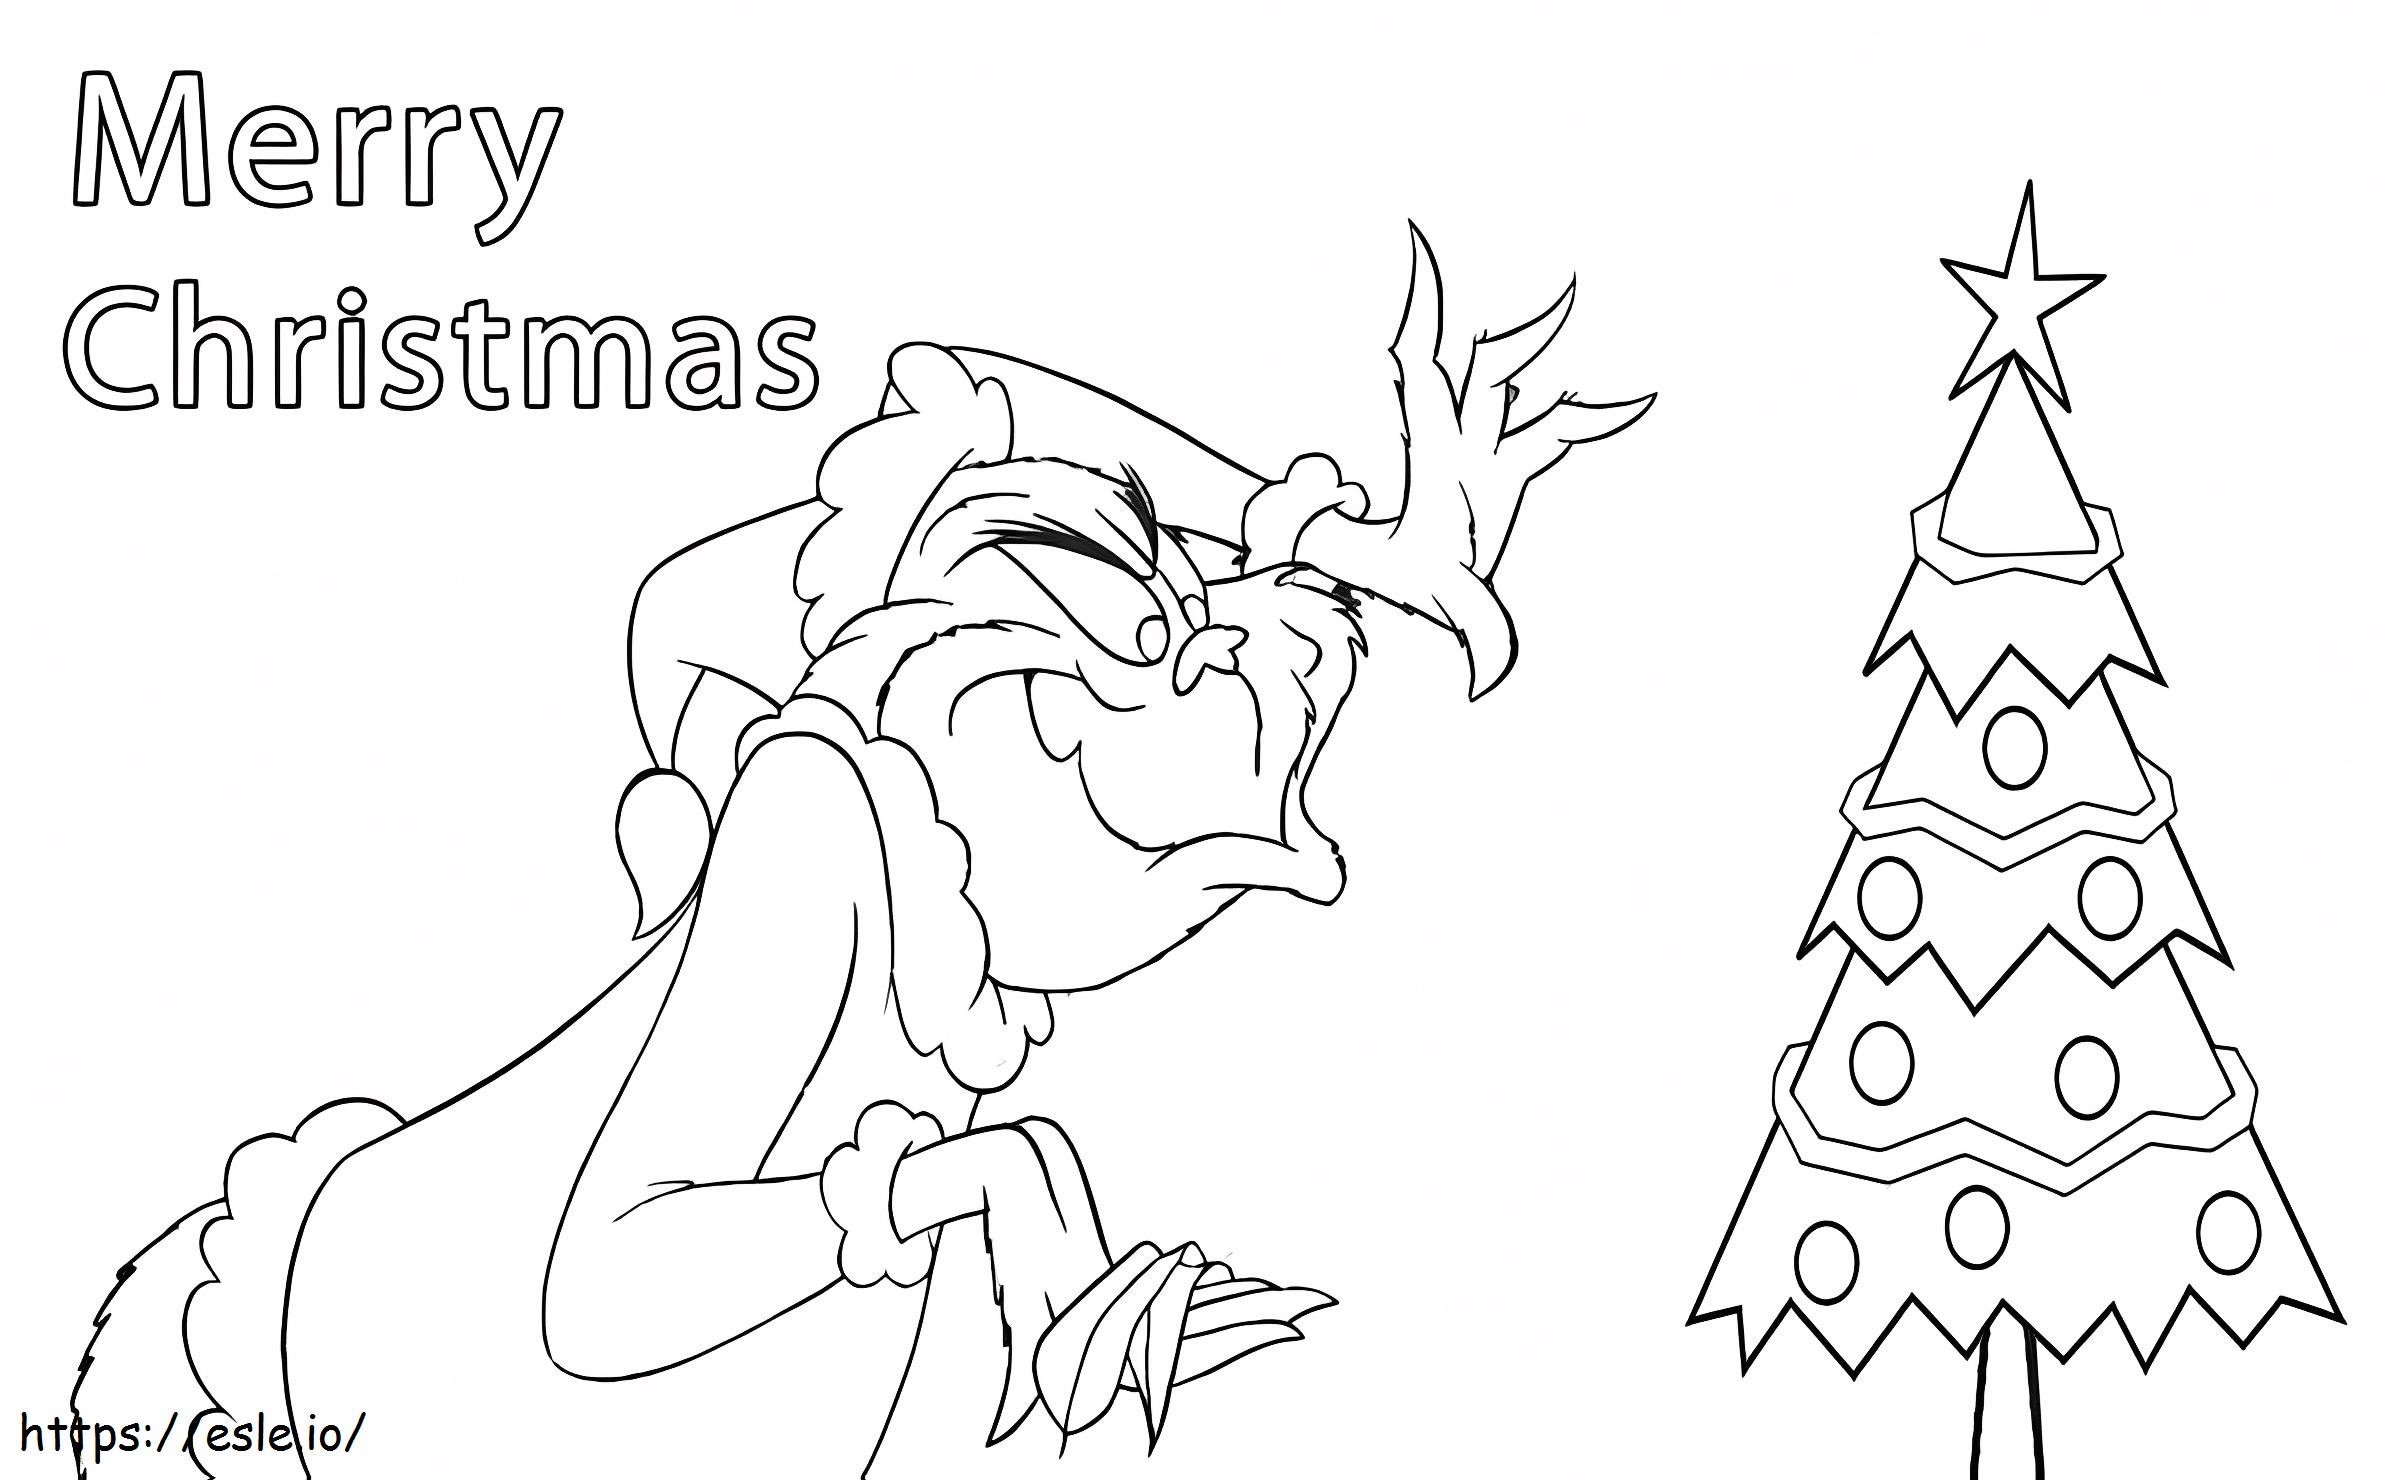 1571988445 Grinch Christmas coloring page